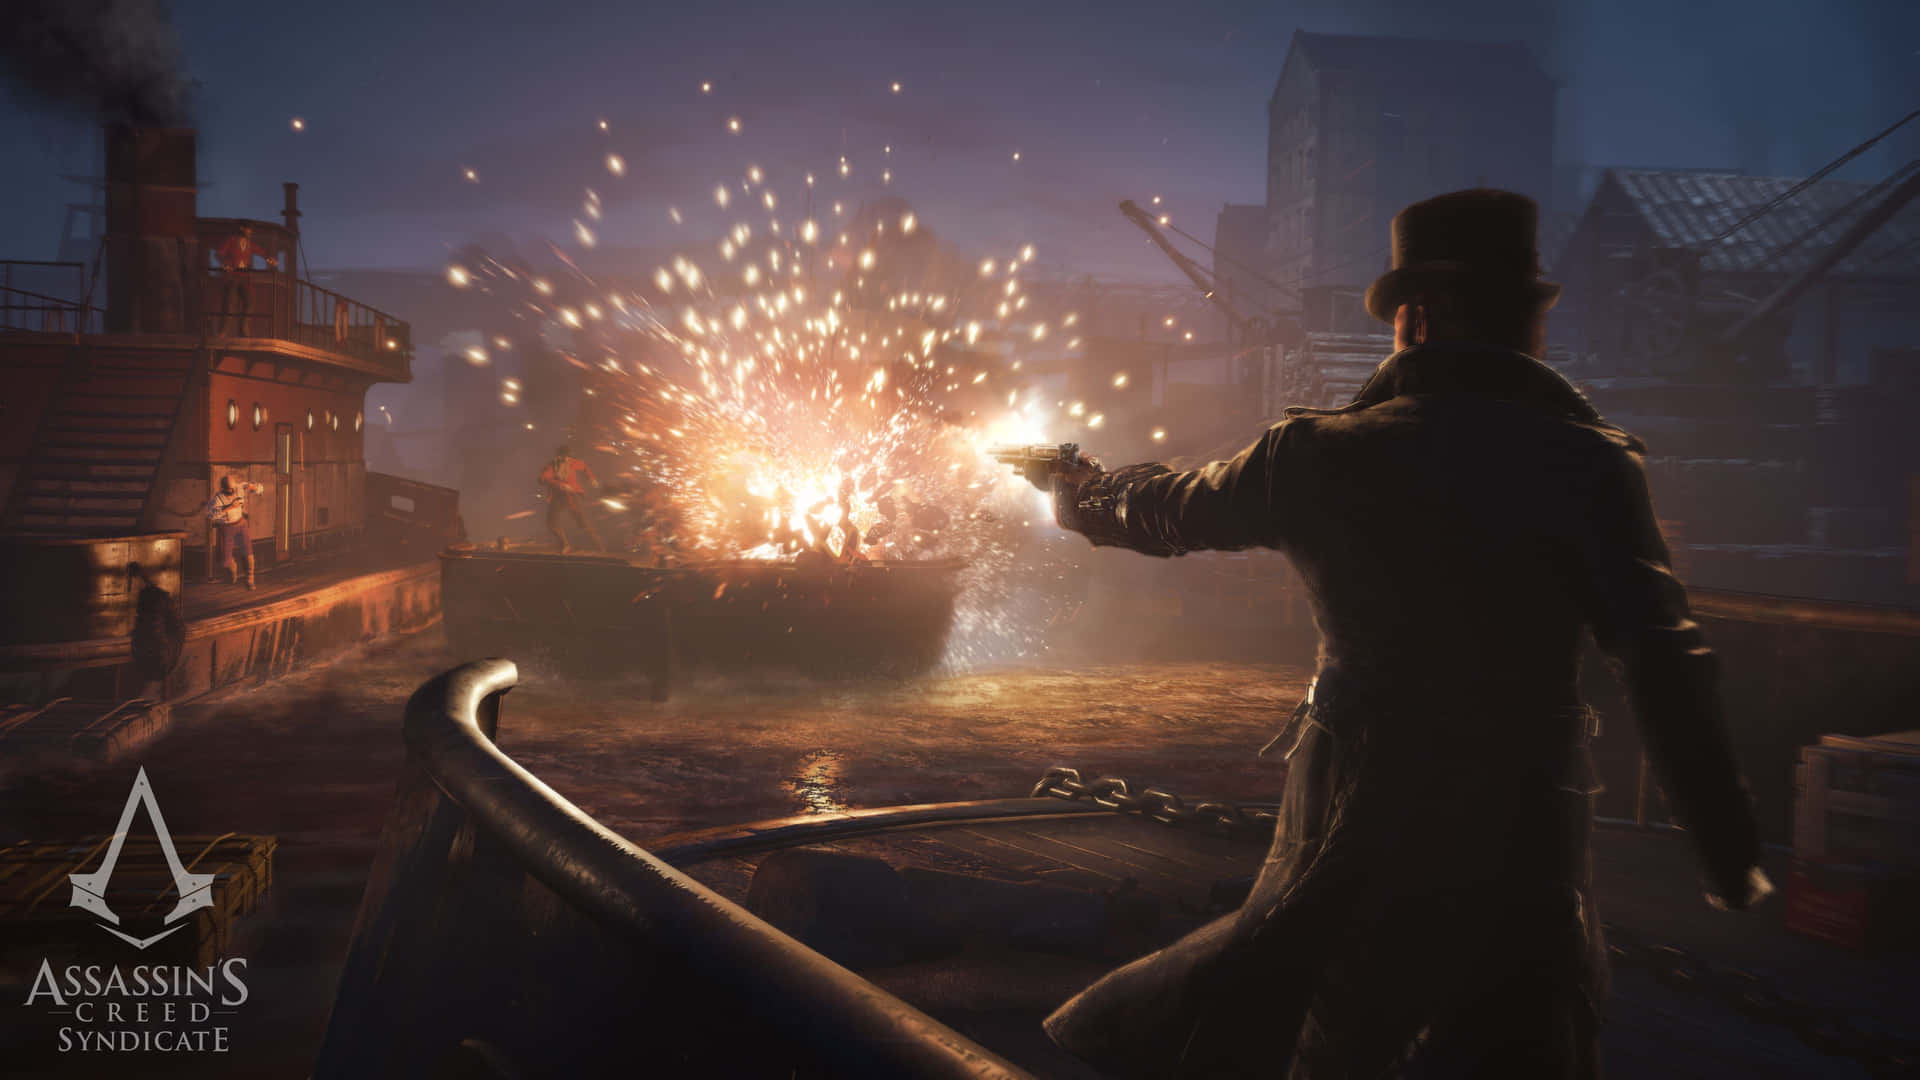 Jacob Frye, Assassin's Creed Syndicate protagonist Wallpaper